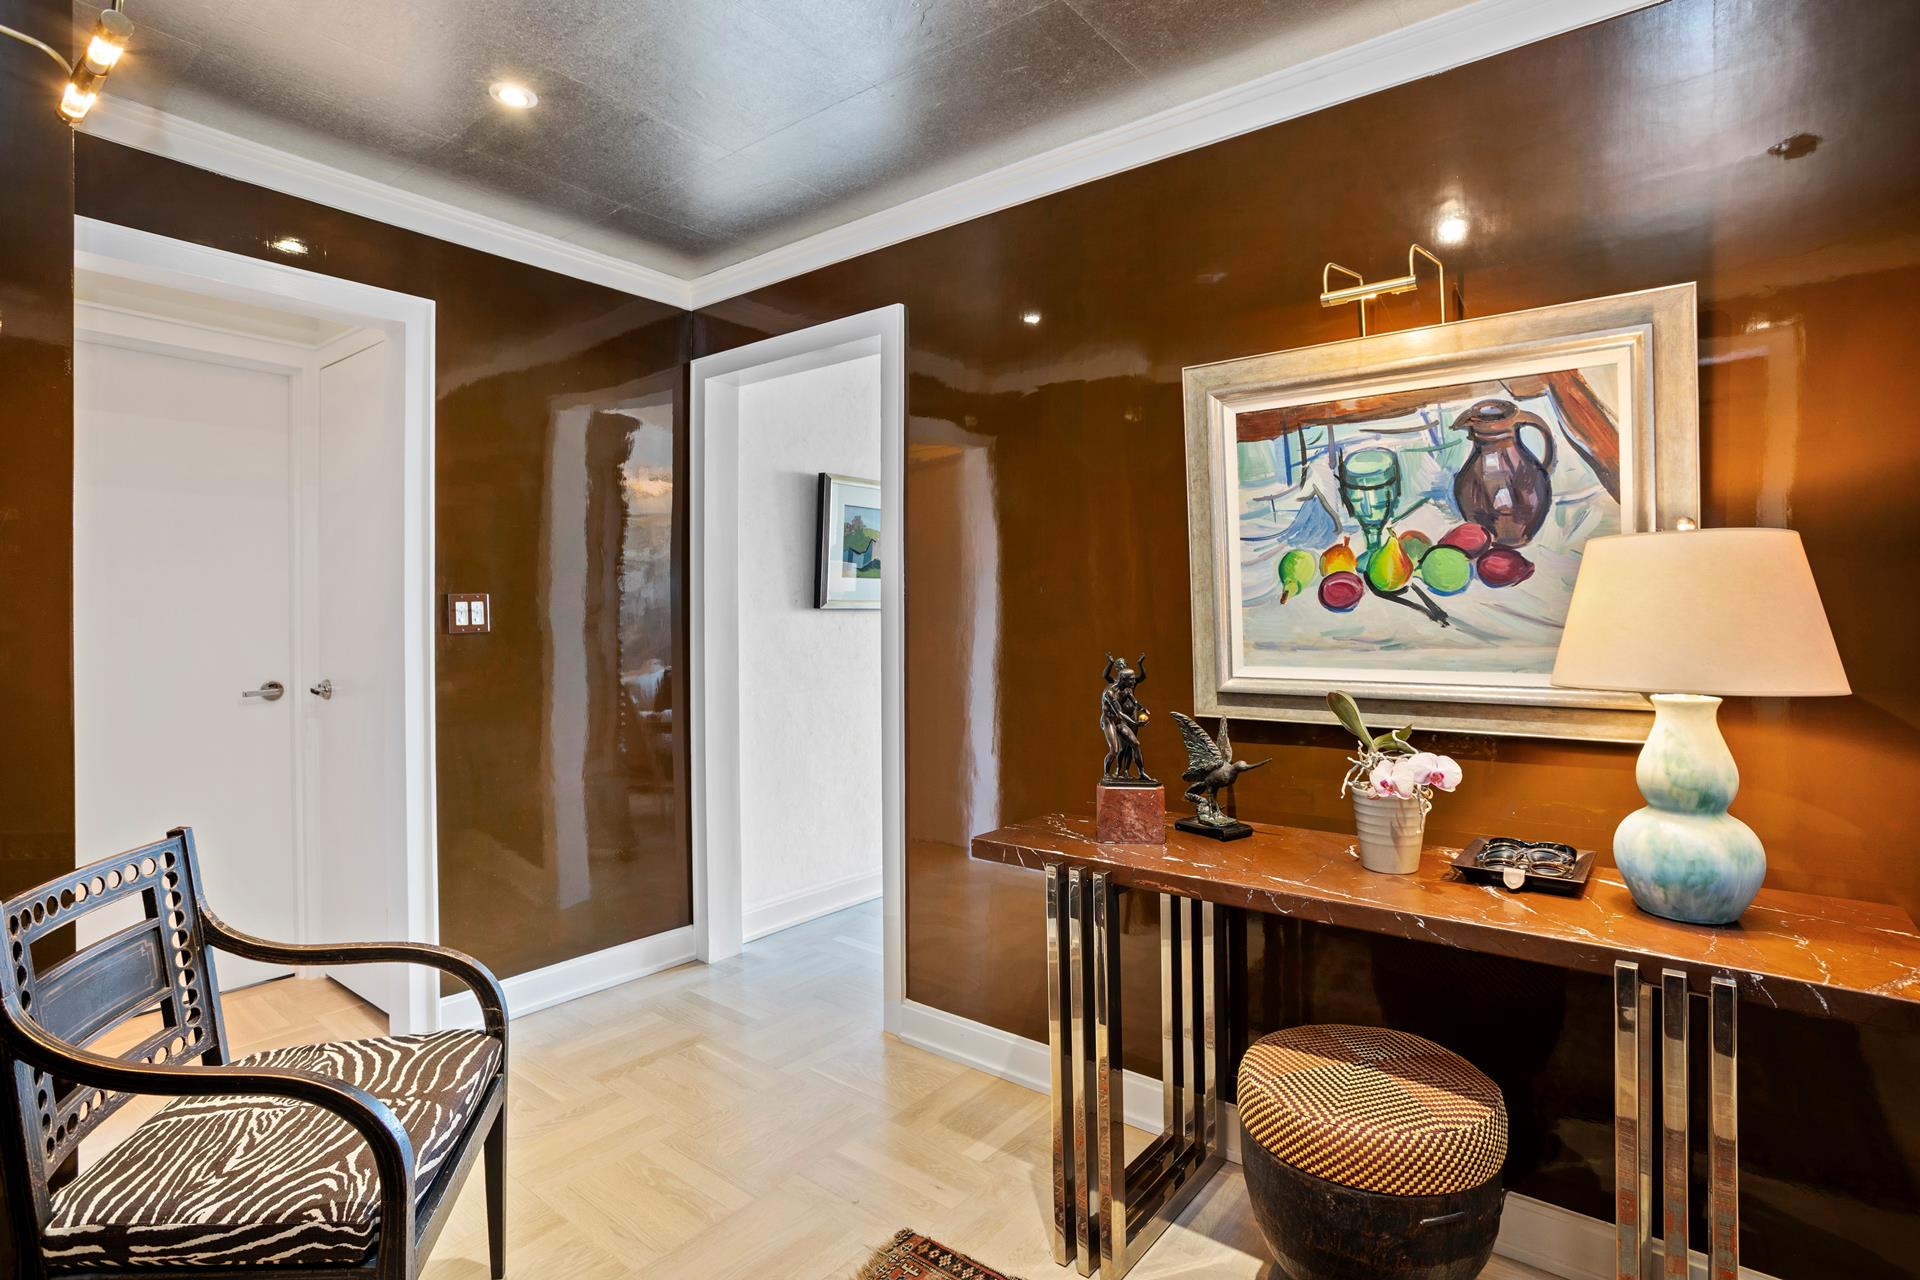 300 East 74th Street 30Ab, Lenox Hill, Upper East Side, NYC - 3 Bedrooms  
3.5 Bathrooms  
7 Rooms - 